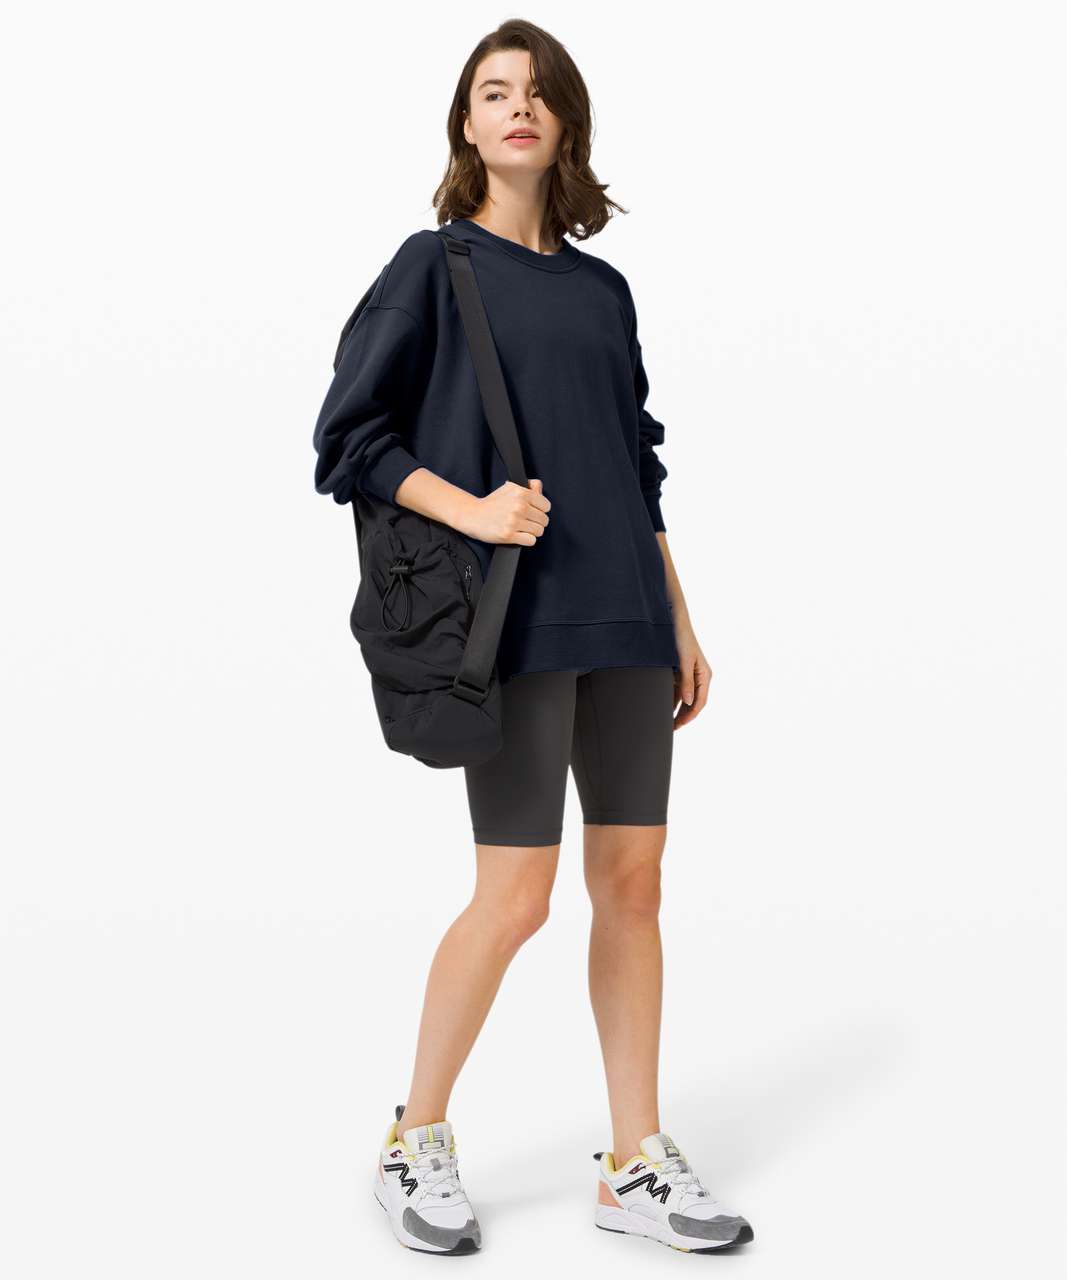 Lululemon Perfectly Oversized Crew - True Navy (First Release)